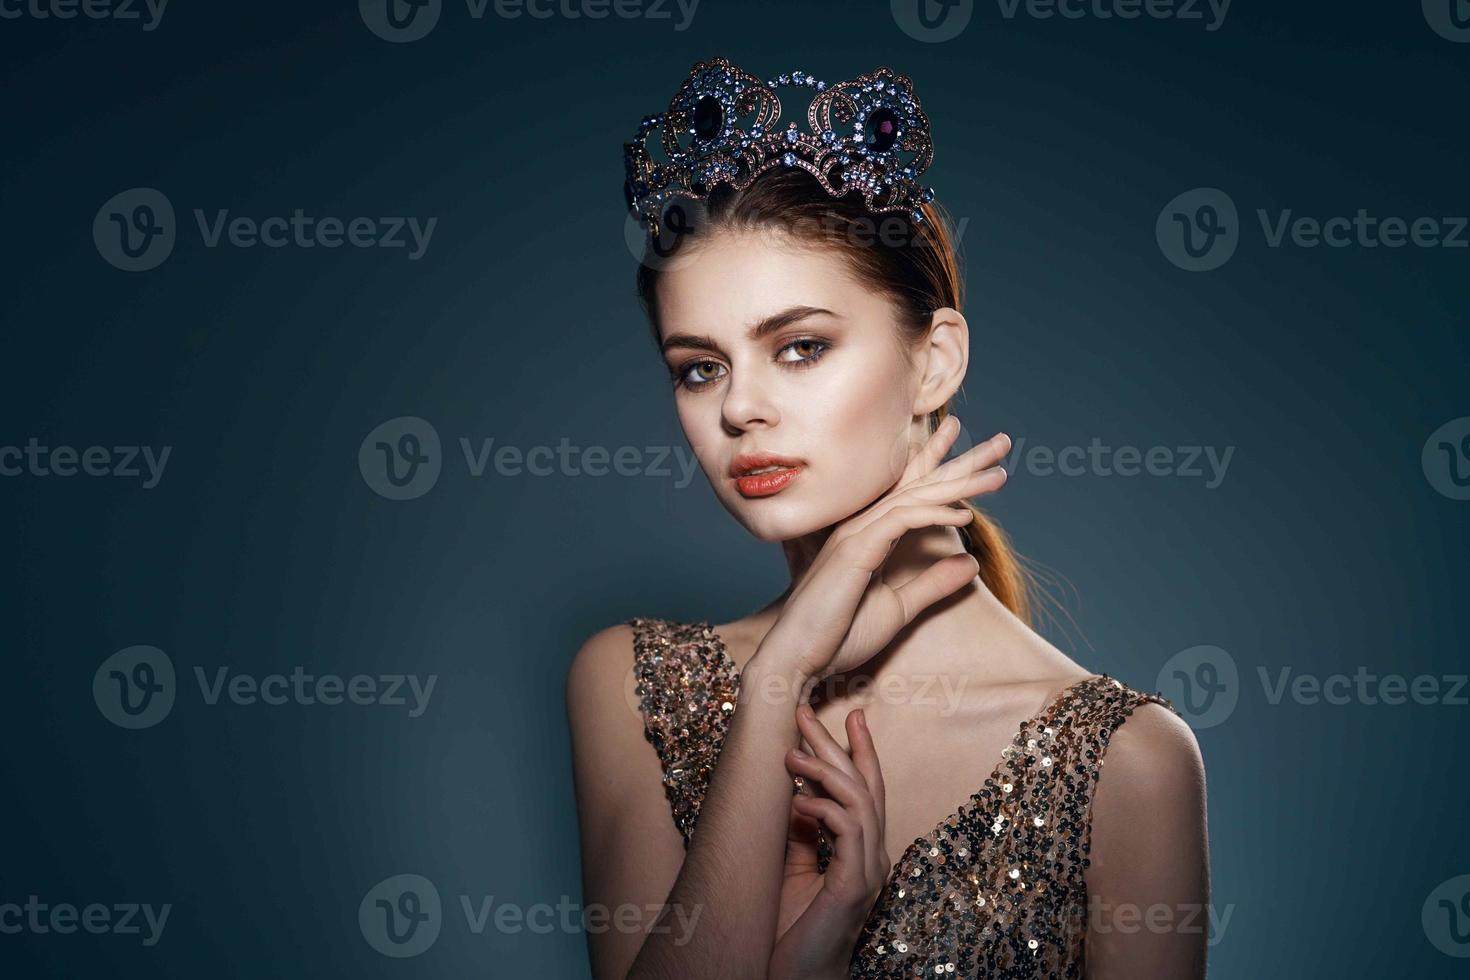 cheerful woman with a crown on her head jewelry luxury celebrity photo